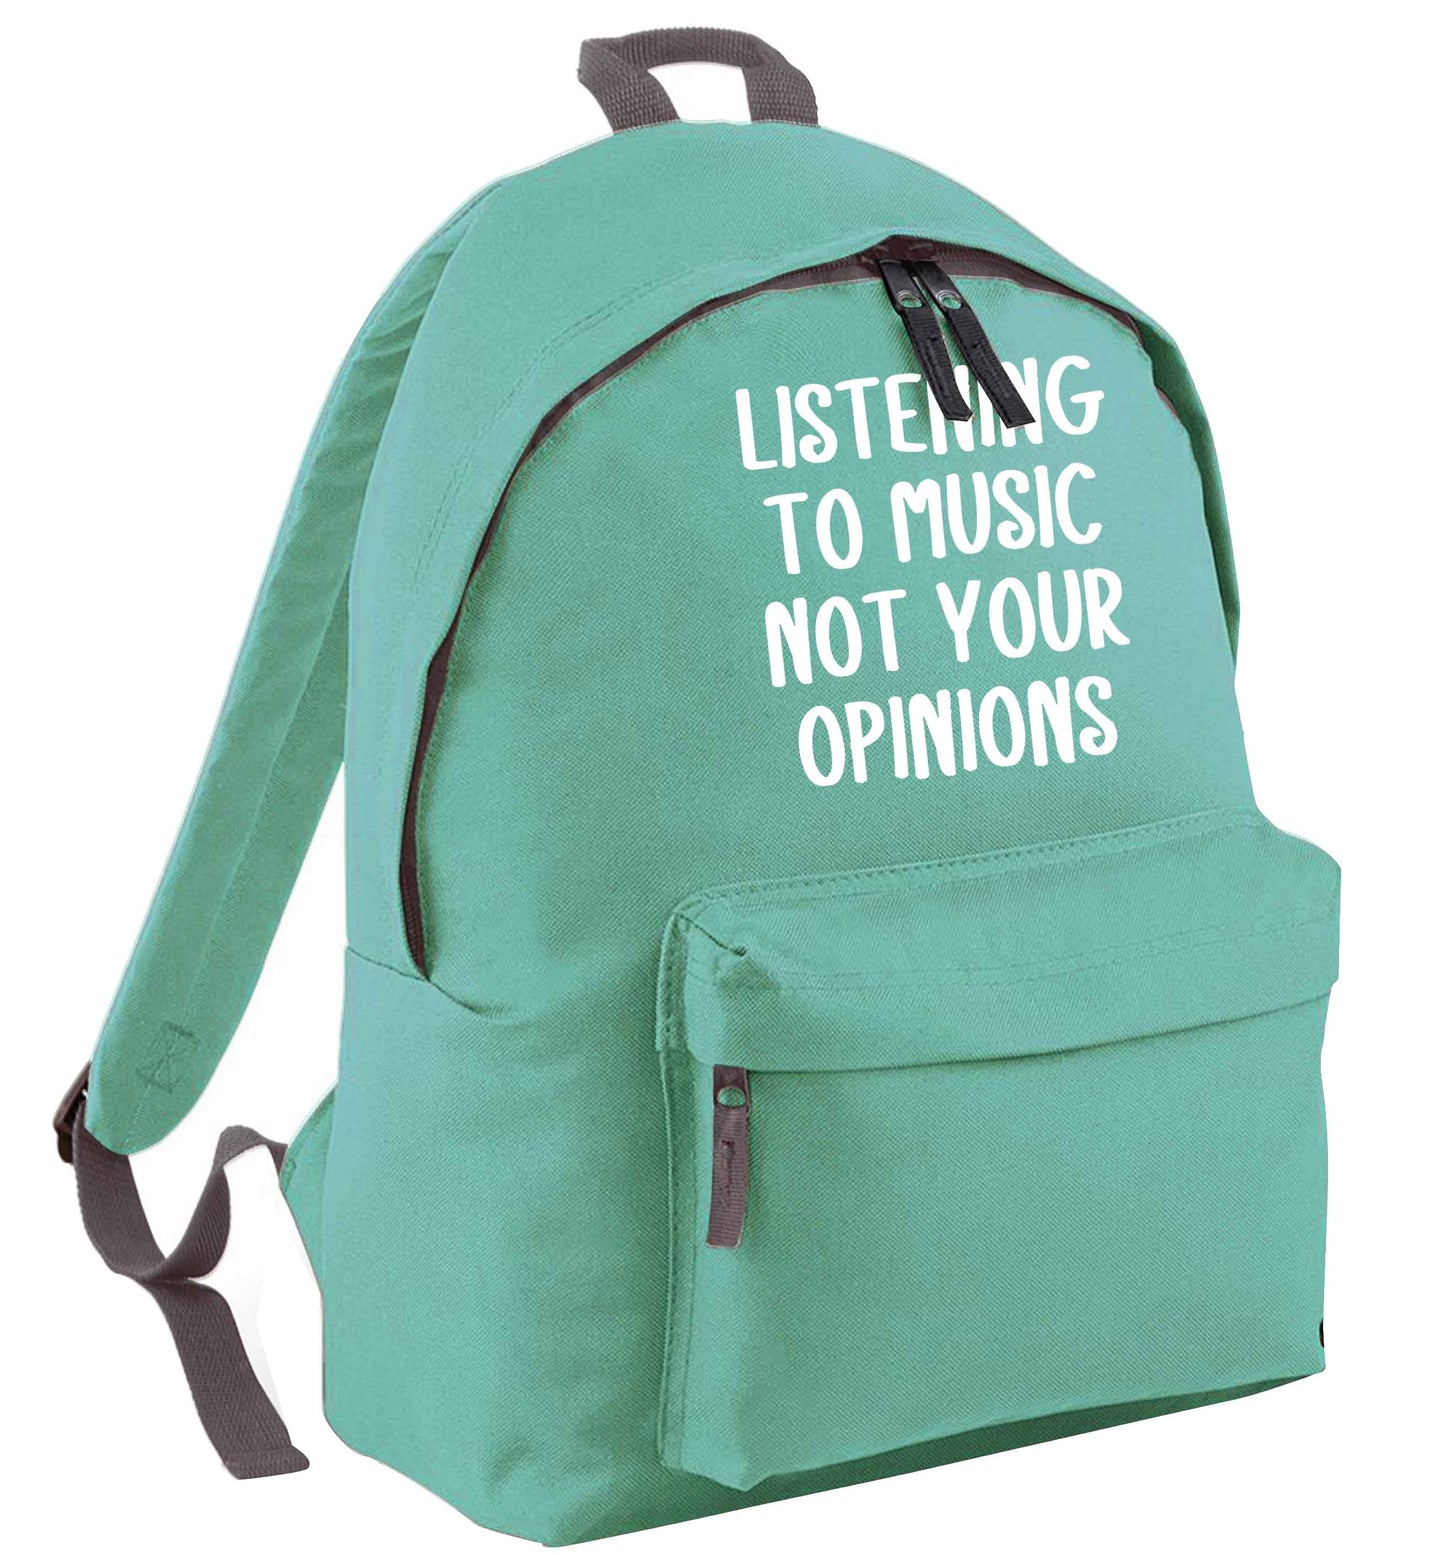 Listening to music not your opinions mint adults backpack